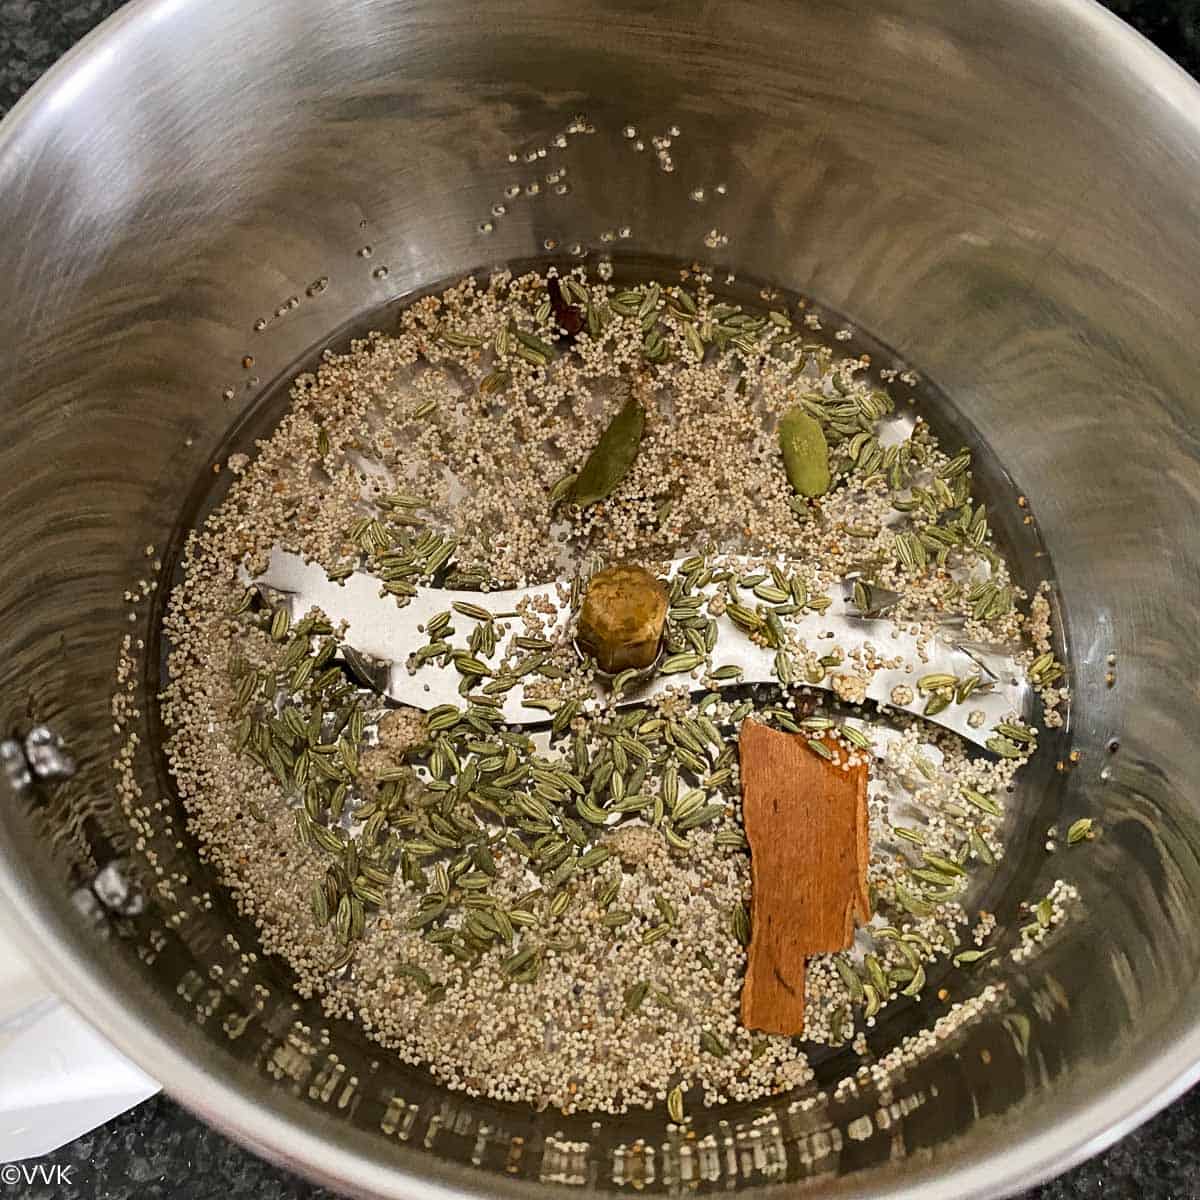 soaking the whole spices